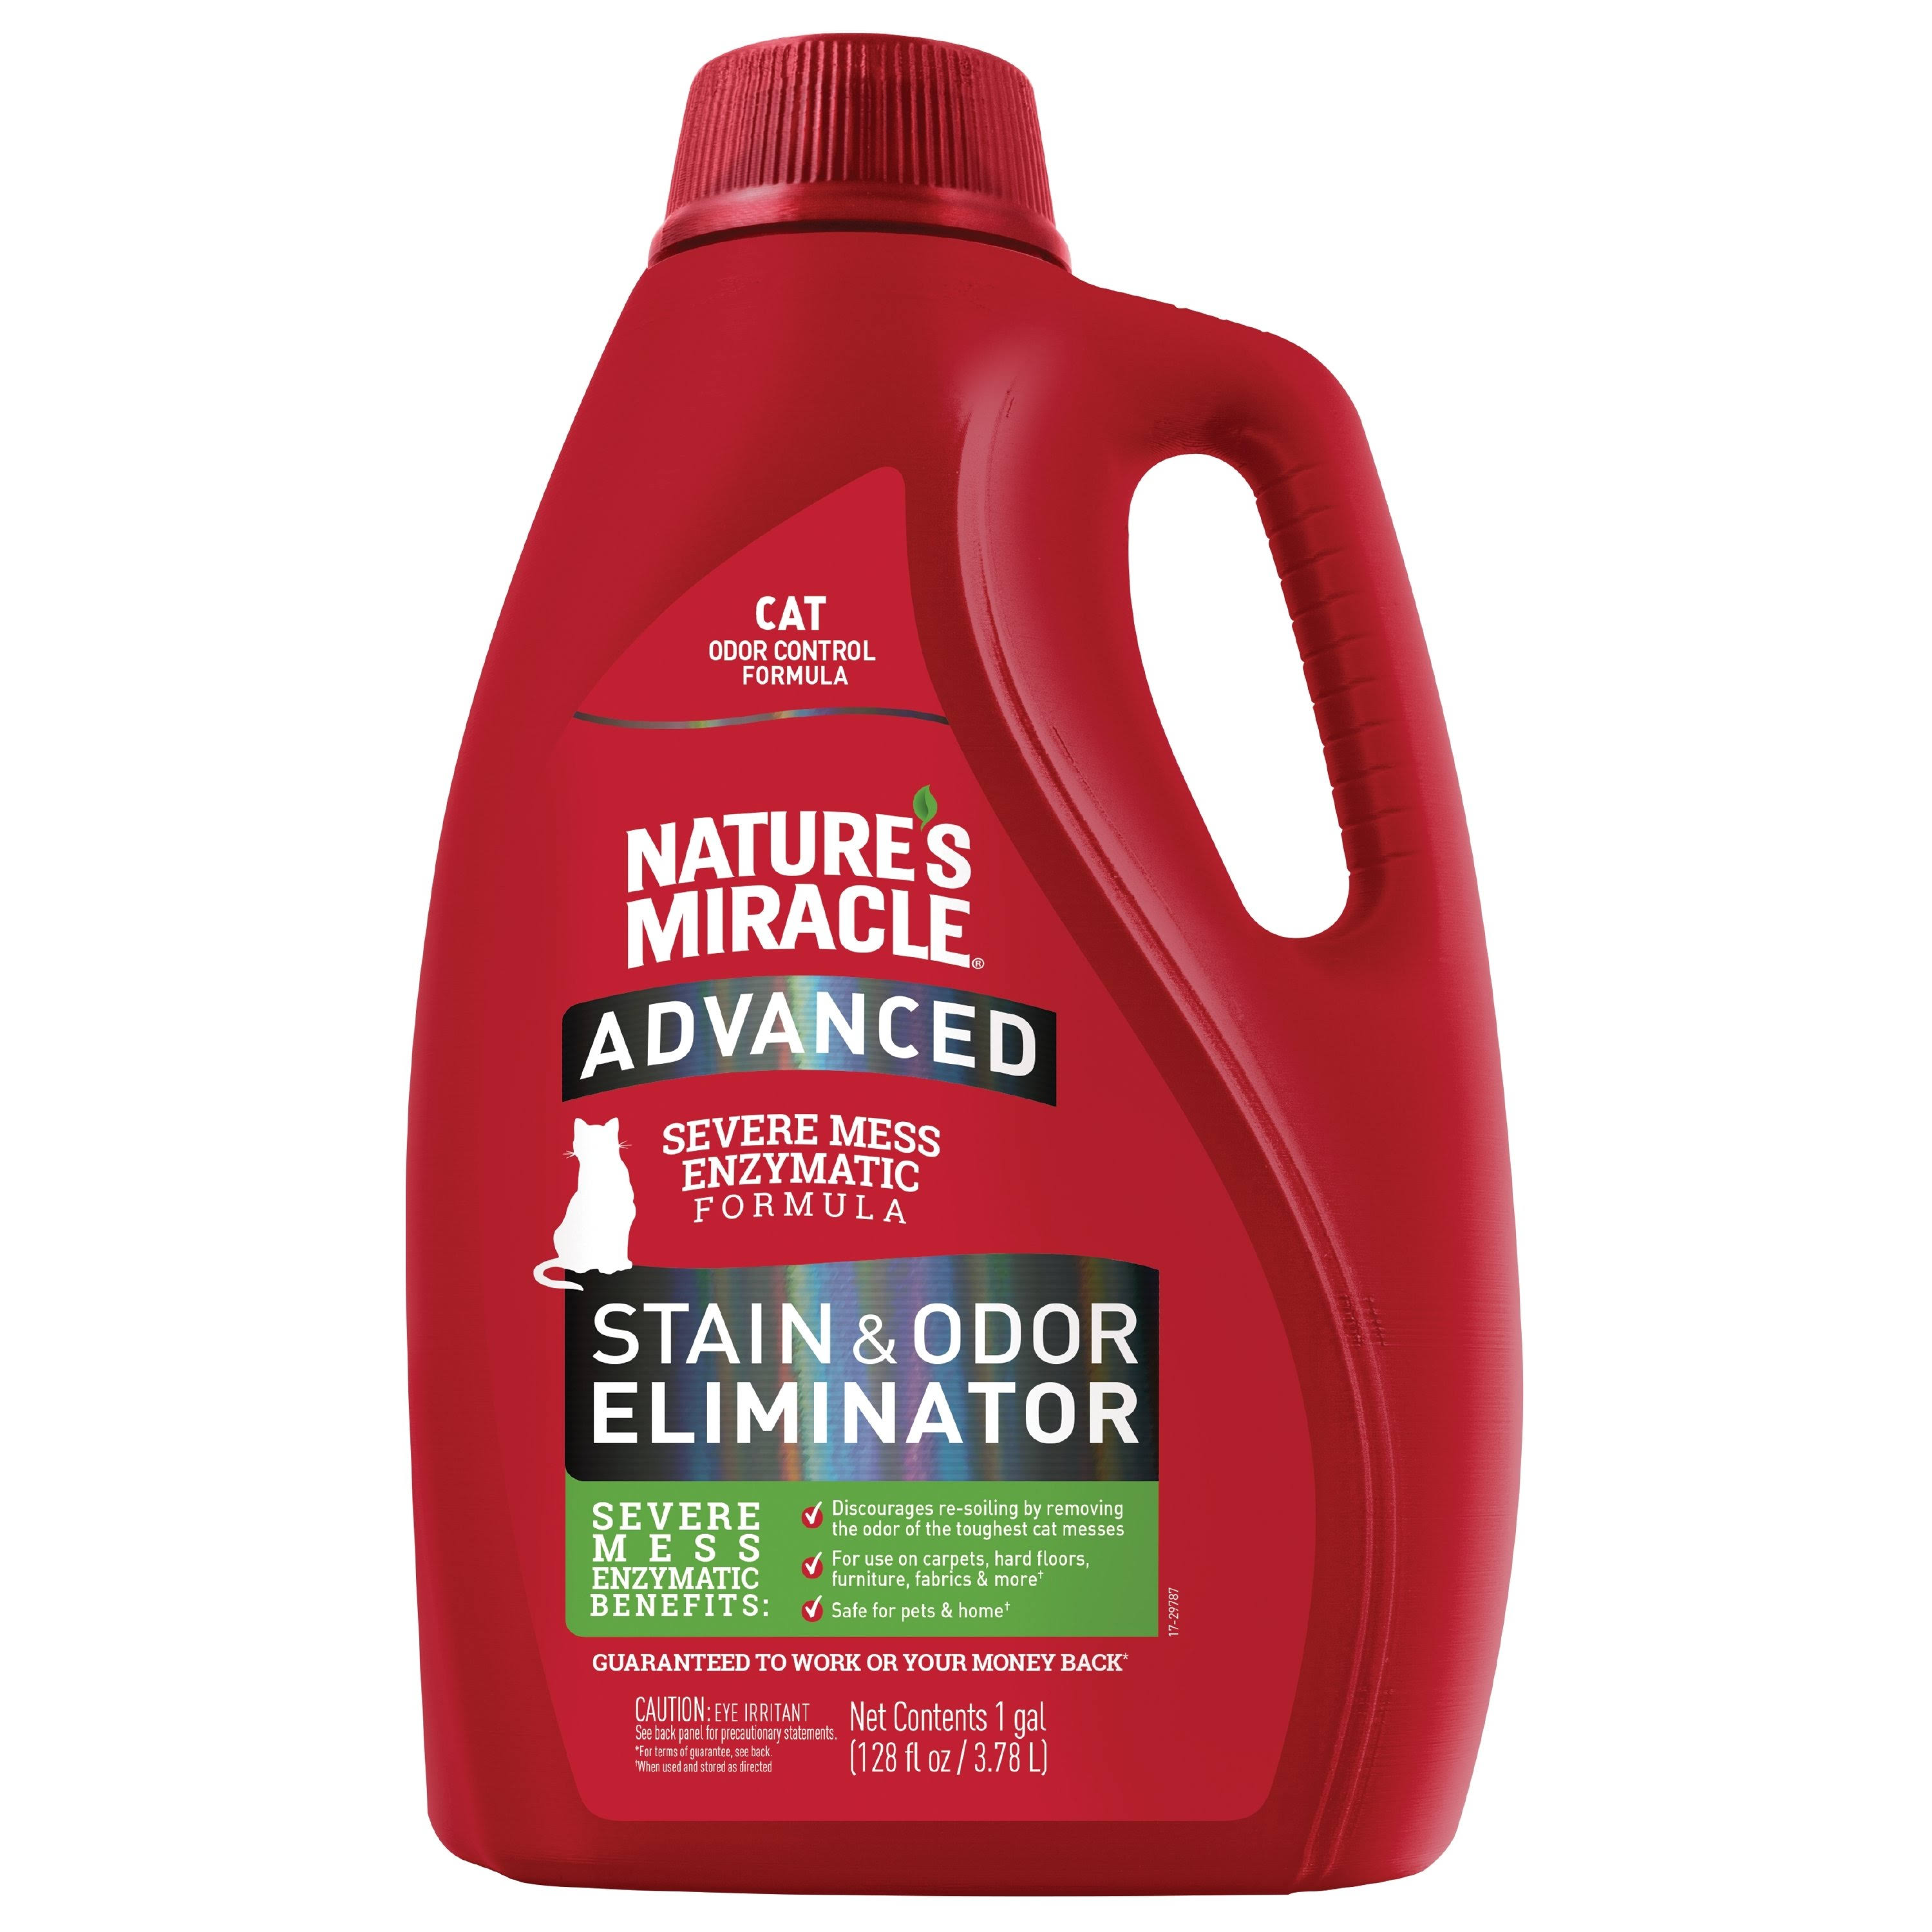 Nature's Miracle Advanced Cat Stain & Odor Remover - 1 Gal